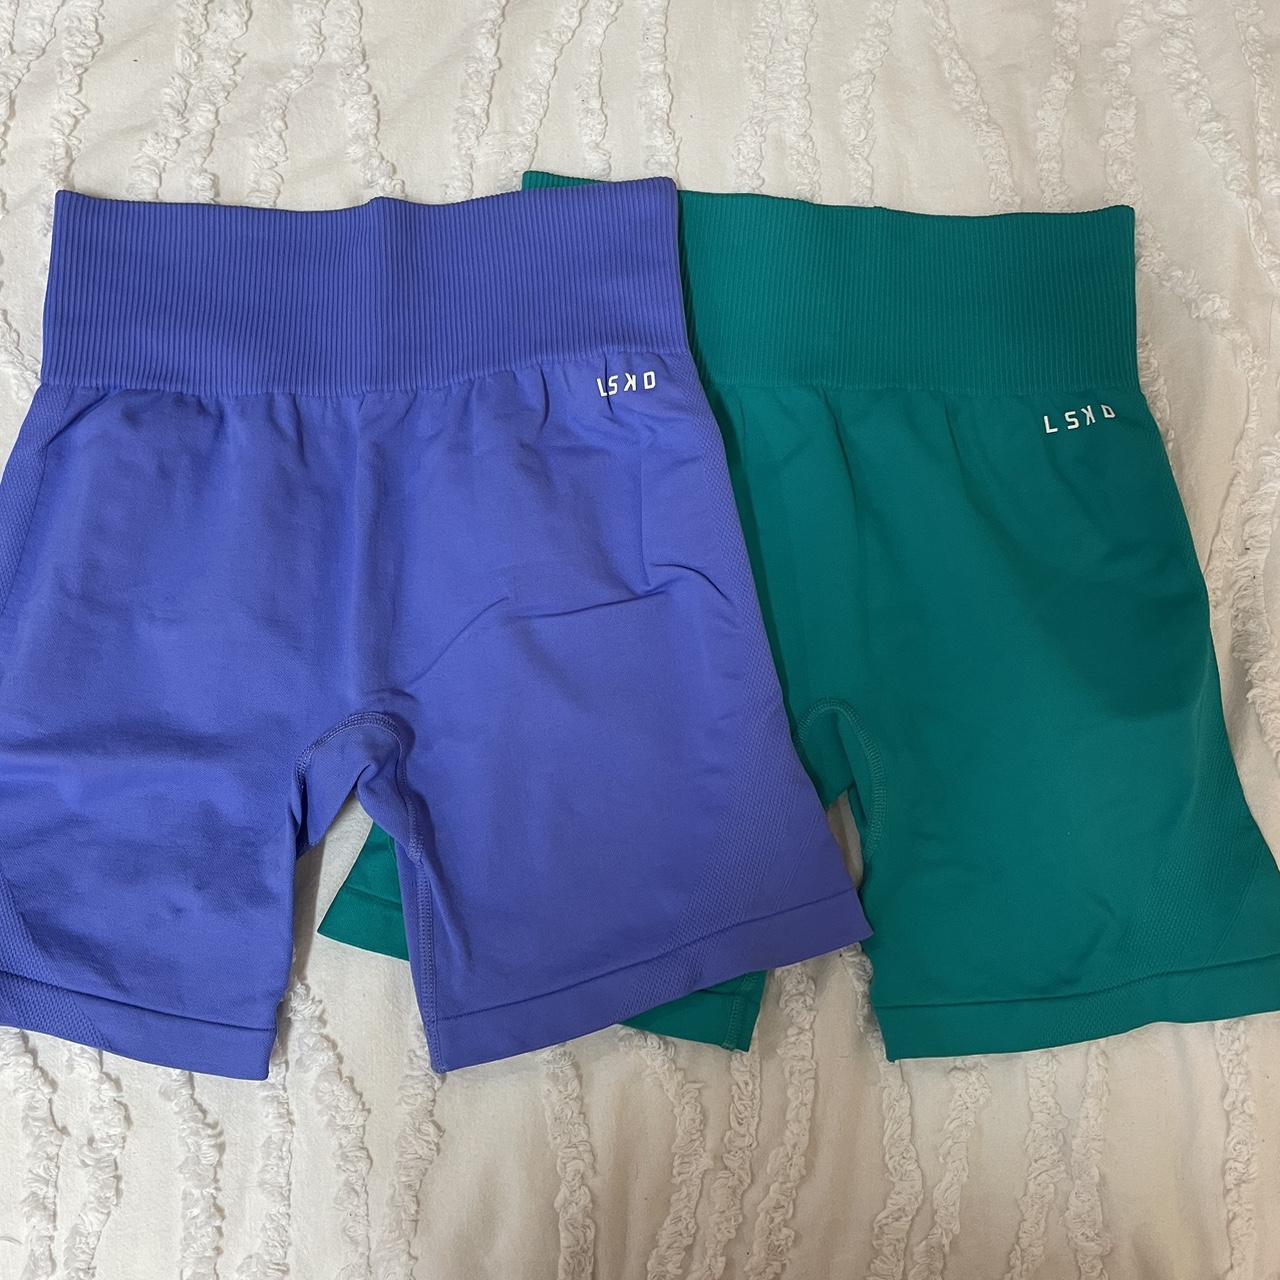 Lskd seamless short Both size M Worn once or twice... - Depop